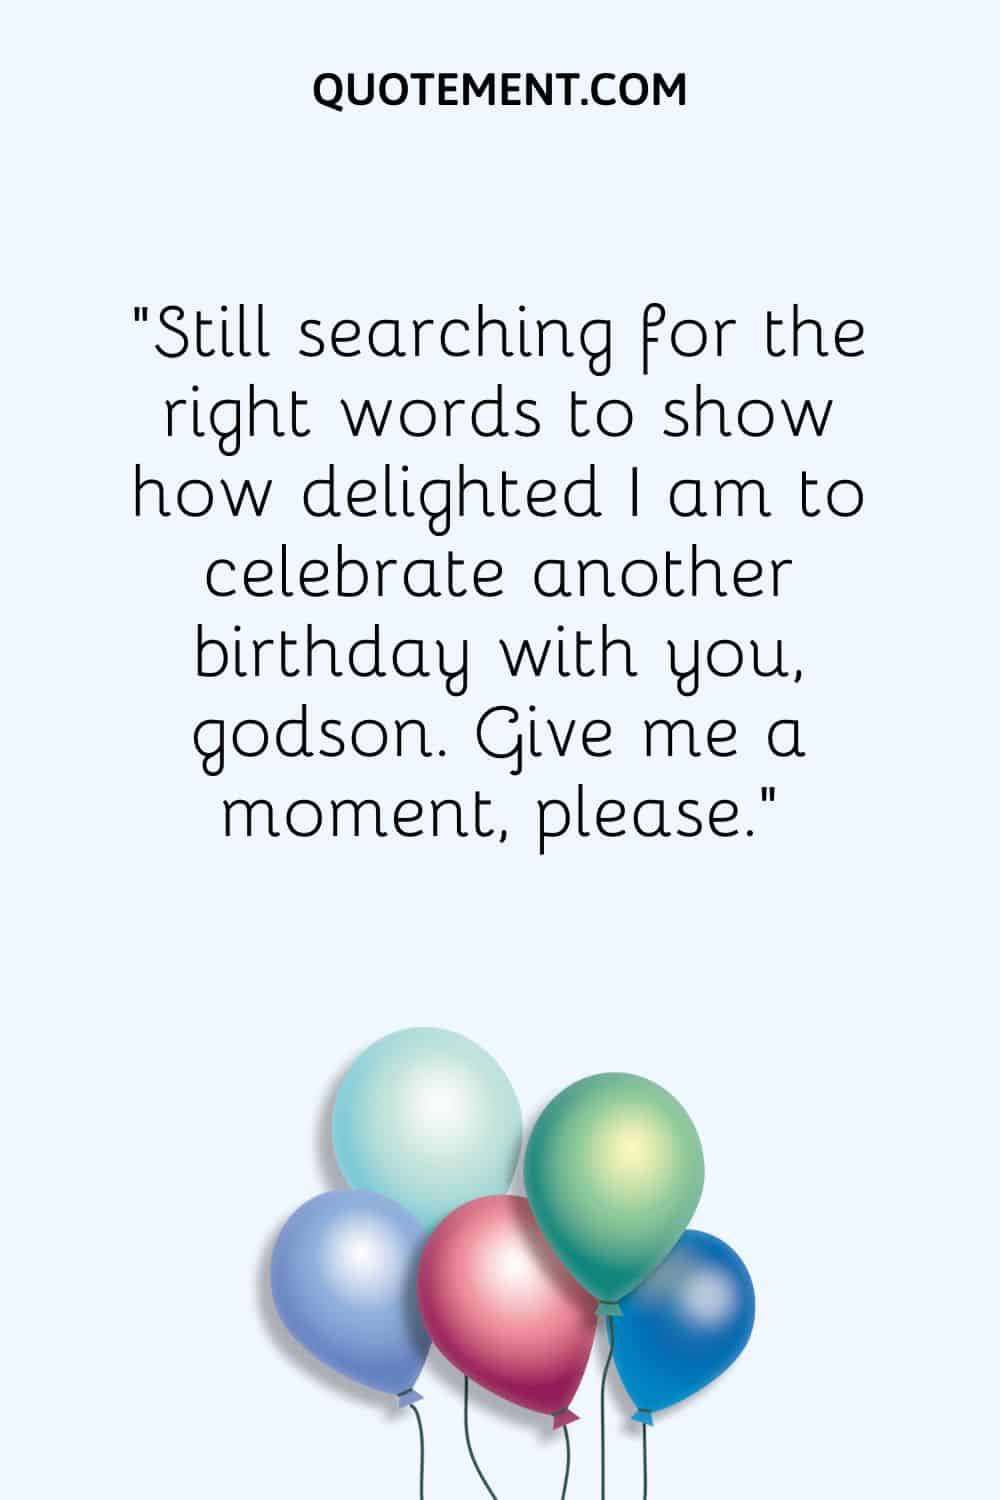 “Still searching for the right words to show how delighted I am to celebrate another birthday with you, godson. Give me a moment, please.”